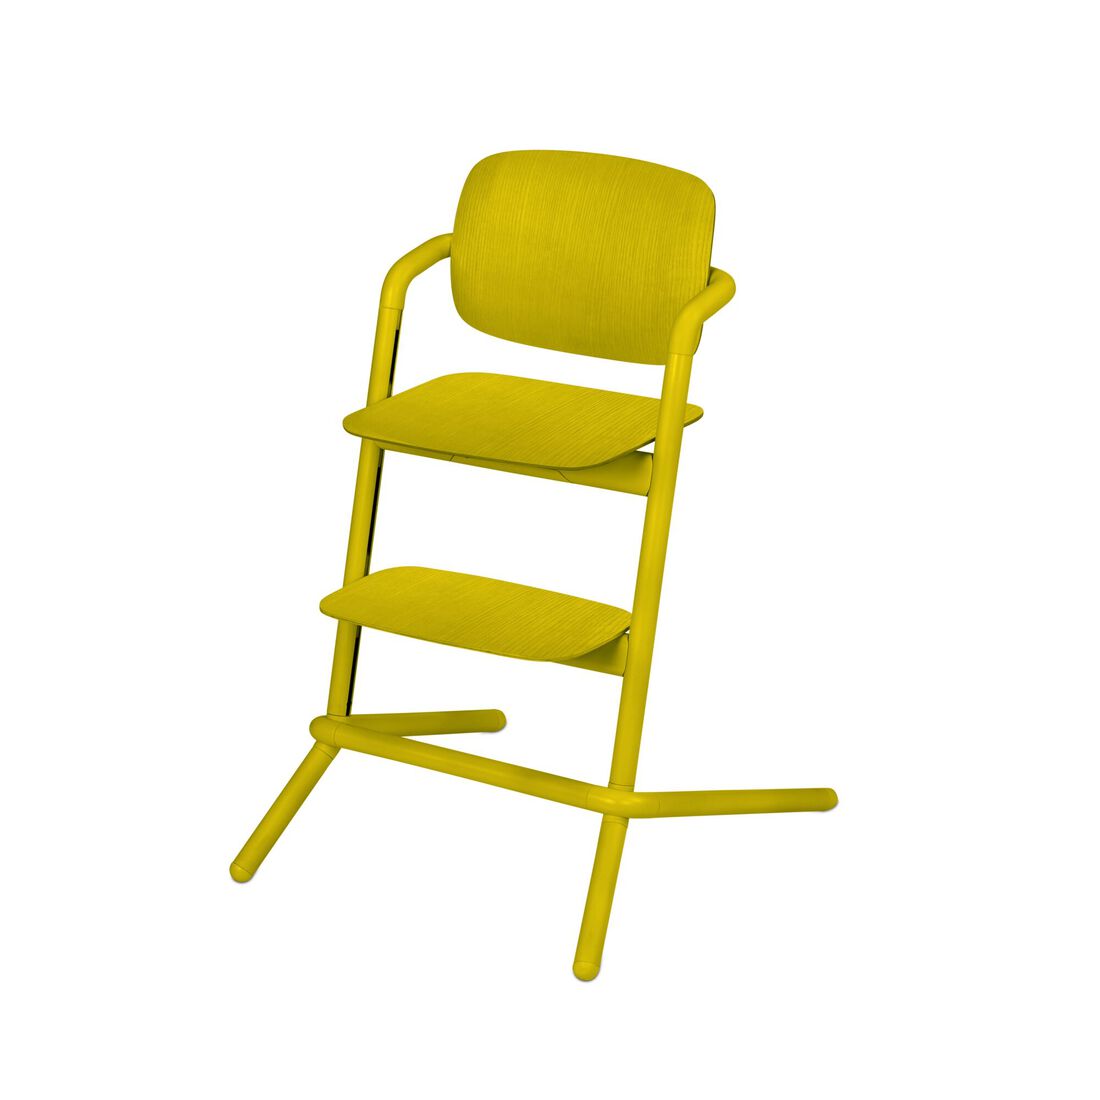 CYBEX Silla Lemo - Canary Yellow (madera) in Canary Yellow (Wood) large número de imagen 1